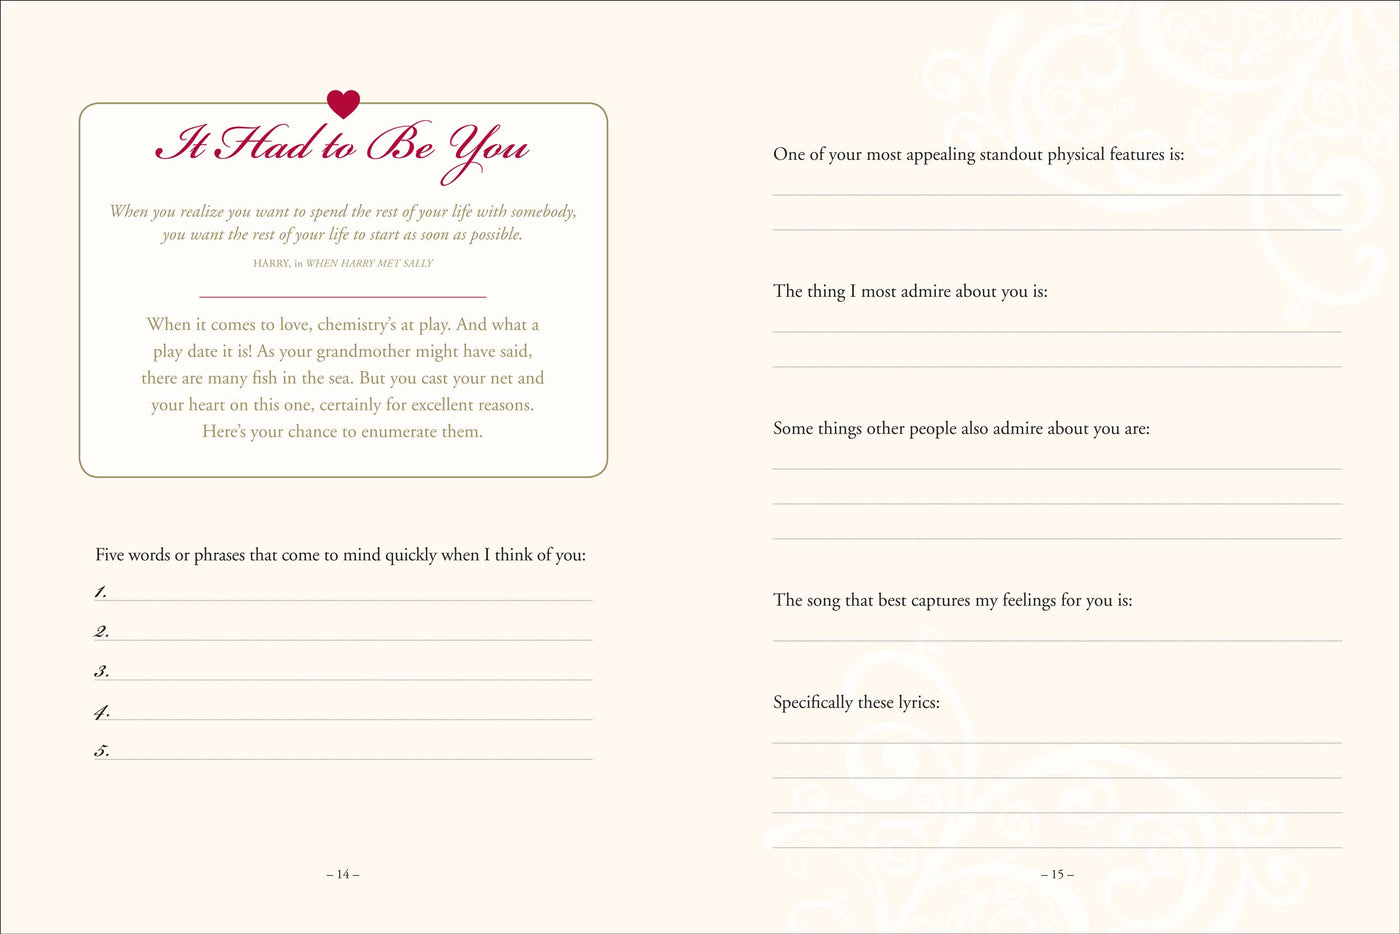 WHY I LOVE YOU JOURNAL OF US | Atlas Stationers.